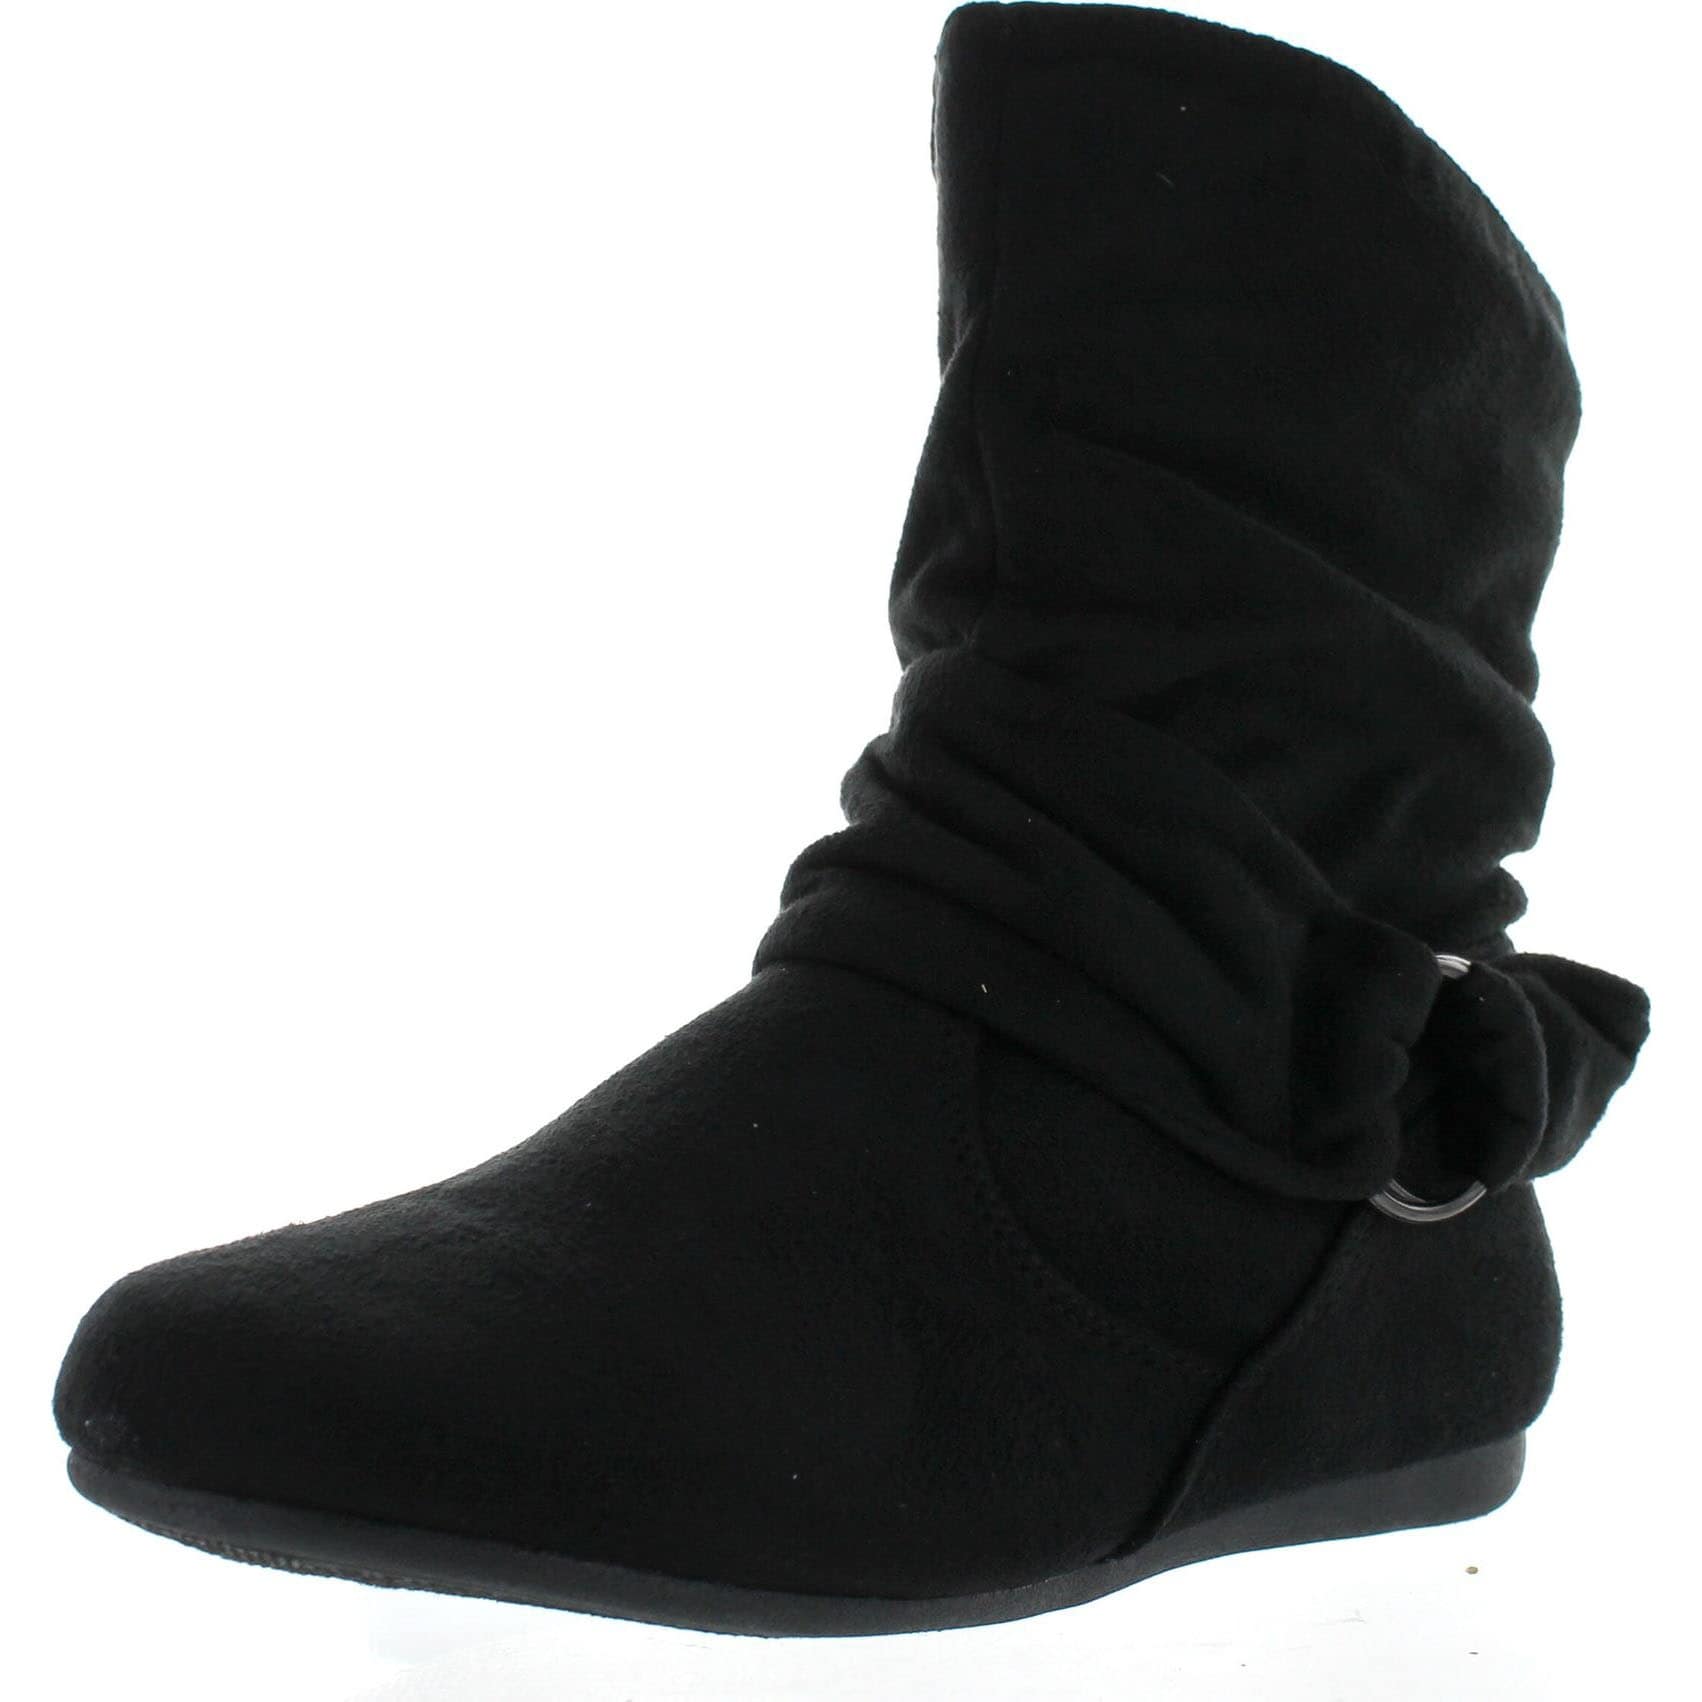 slouch ankle boots flat